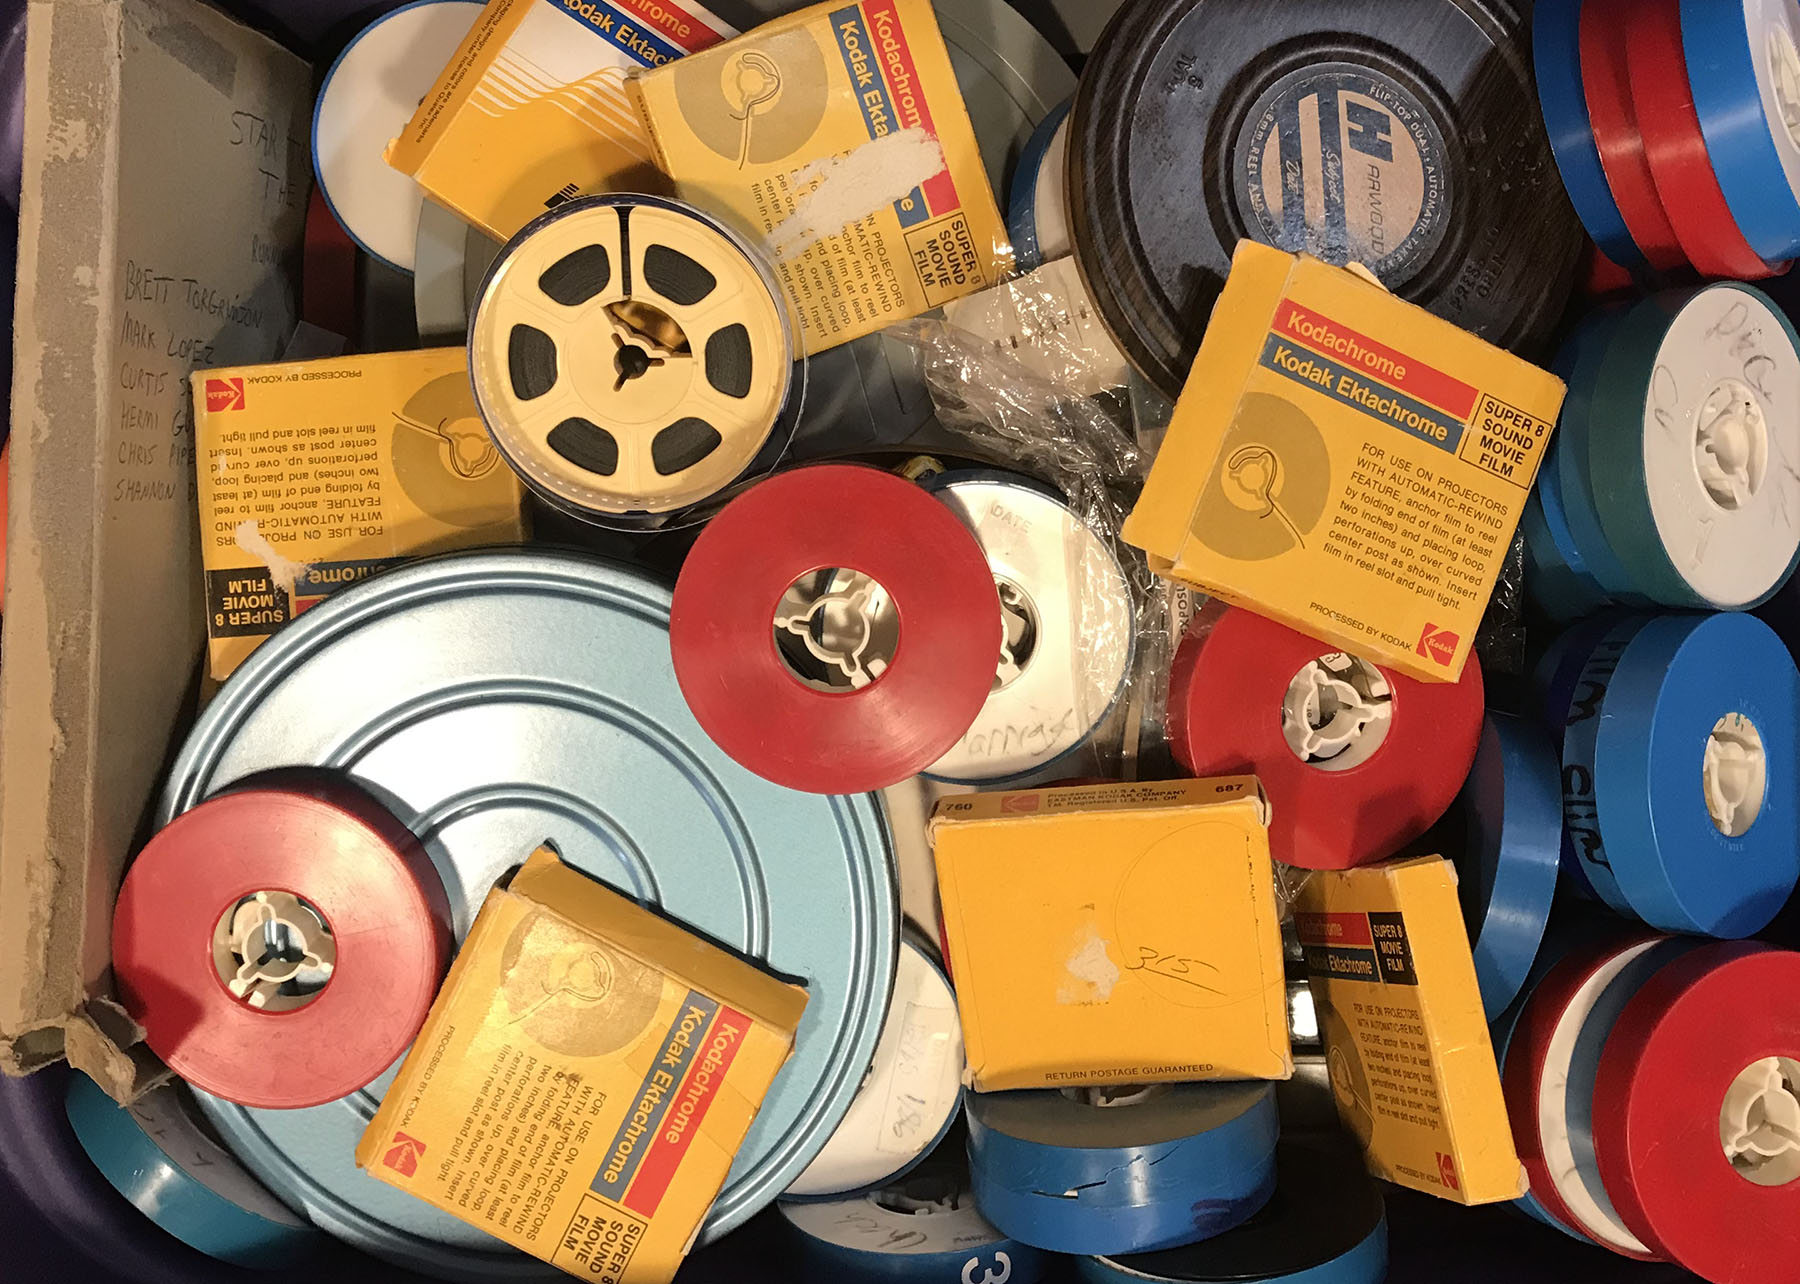 10 TIPS FOR PRESERVING FAMILY MOVIES